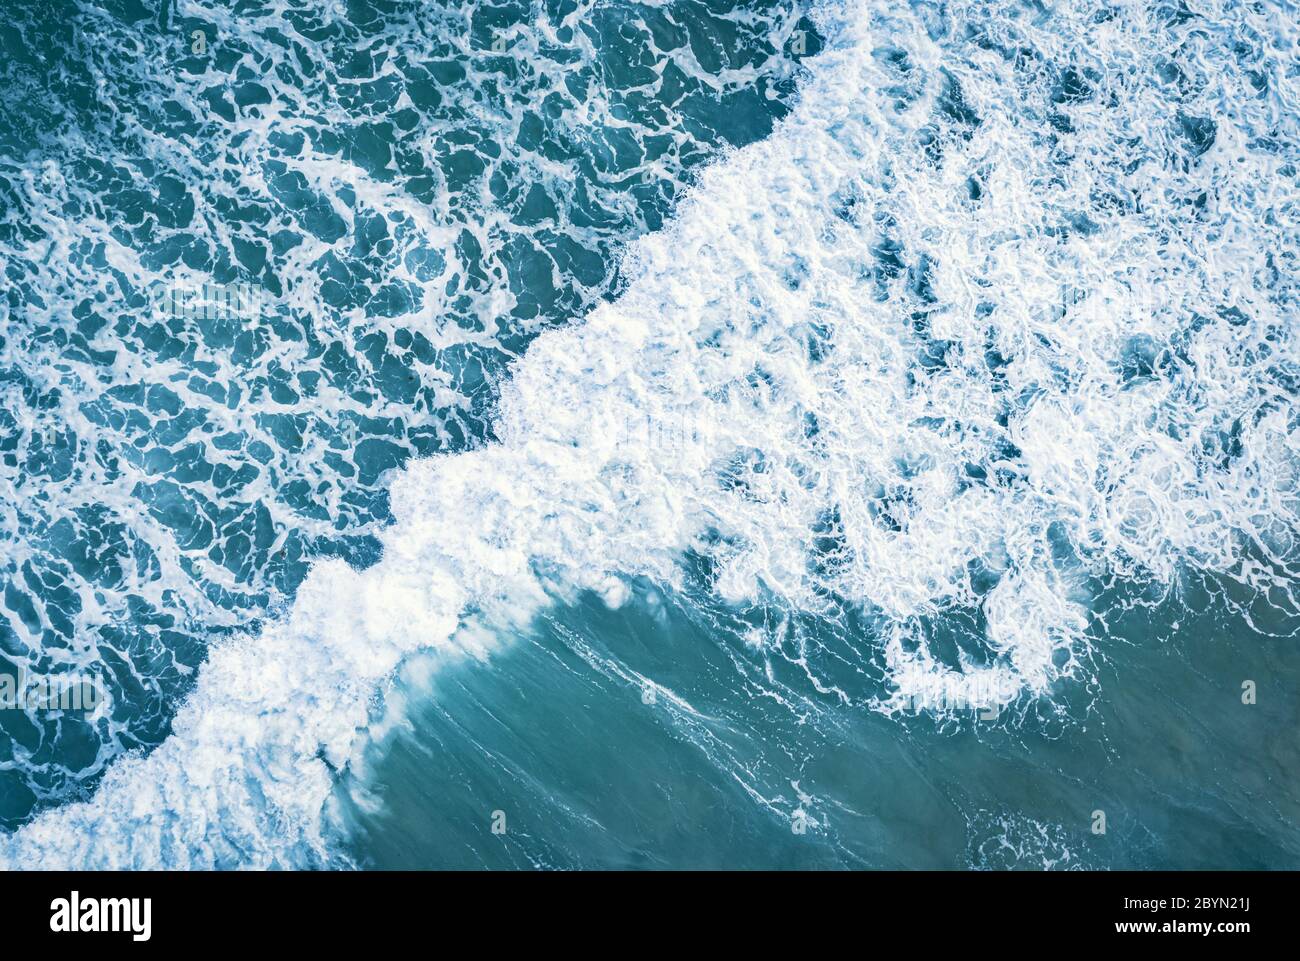 Aerial top view of white foam on the surface of the blue sea. Stock Photo